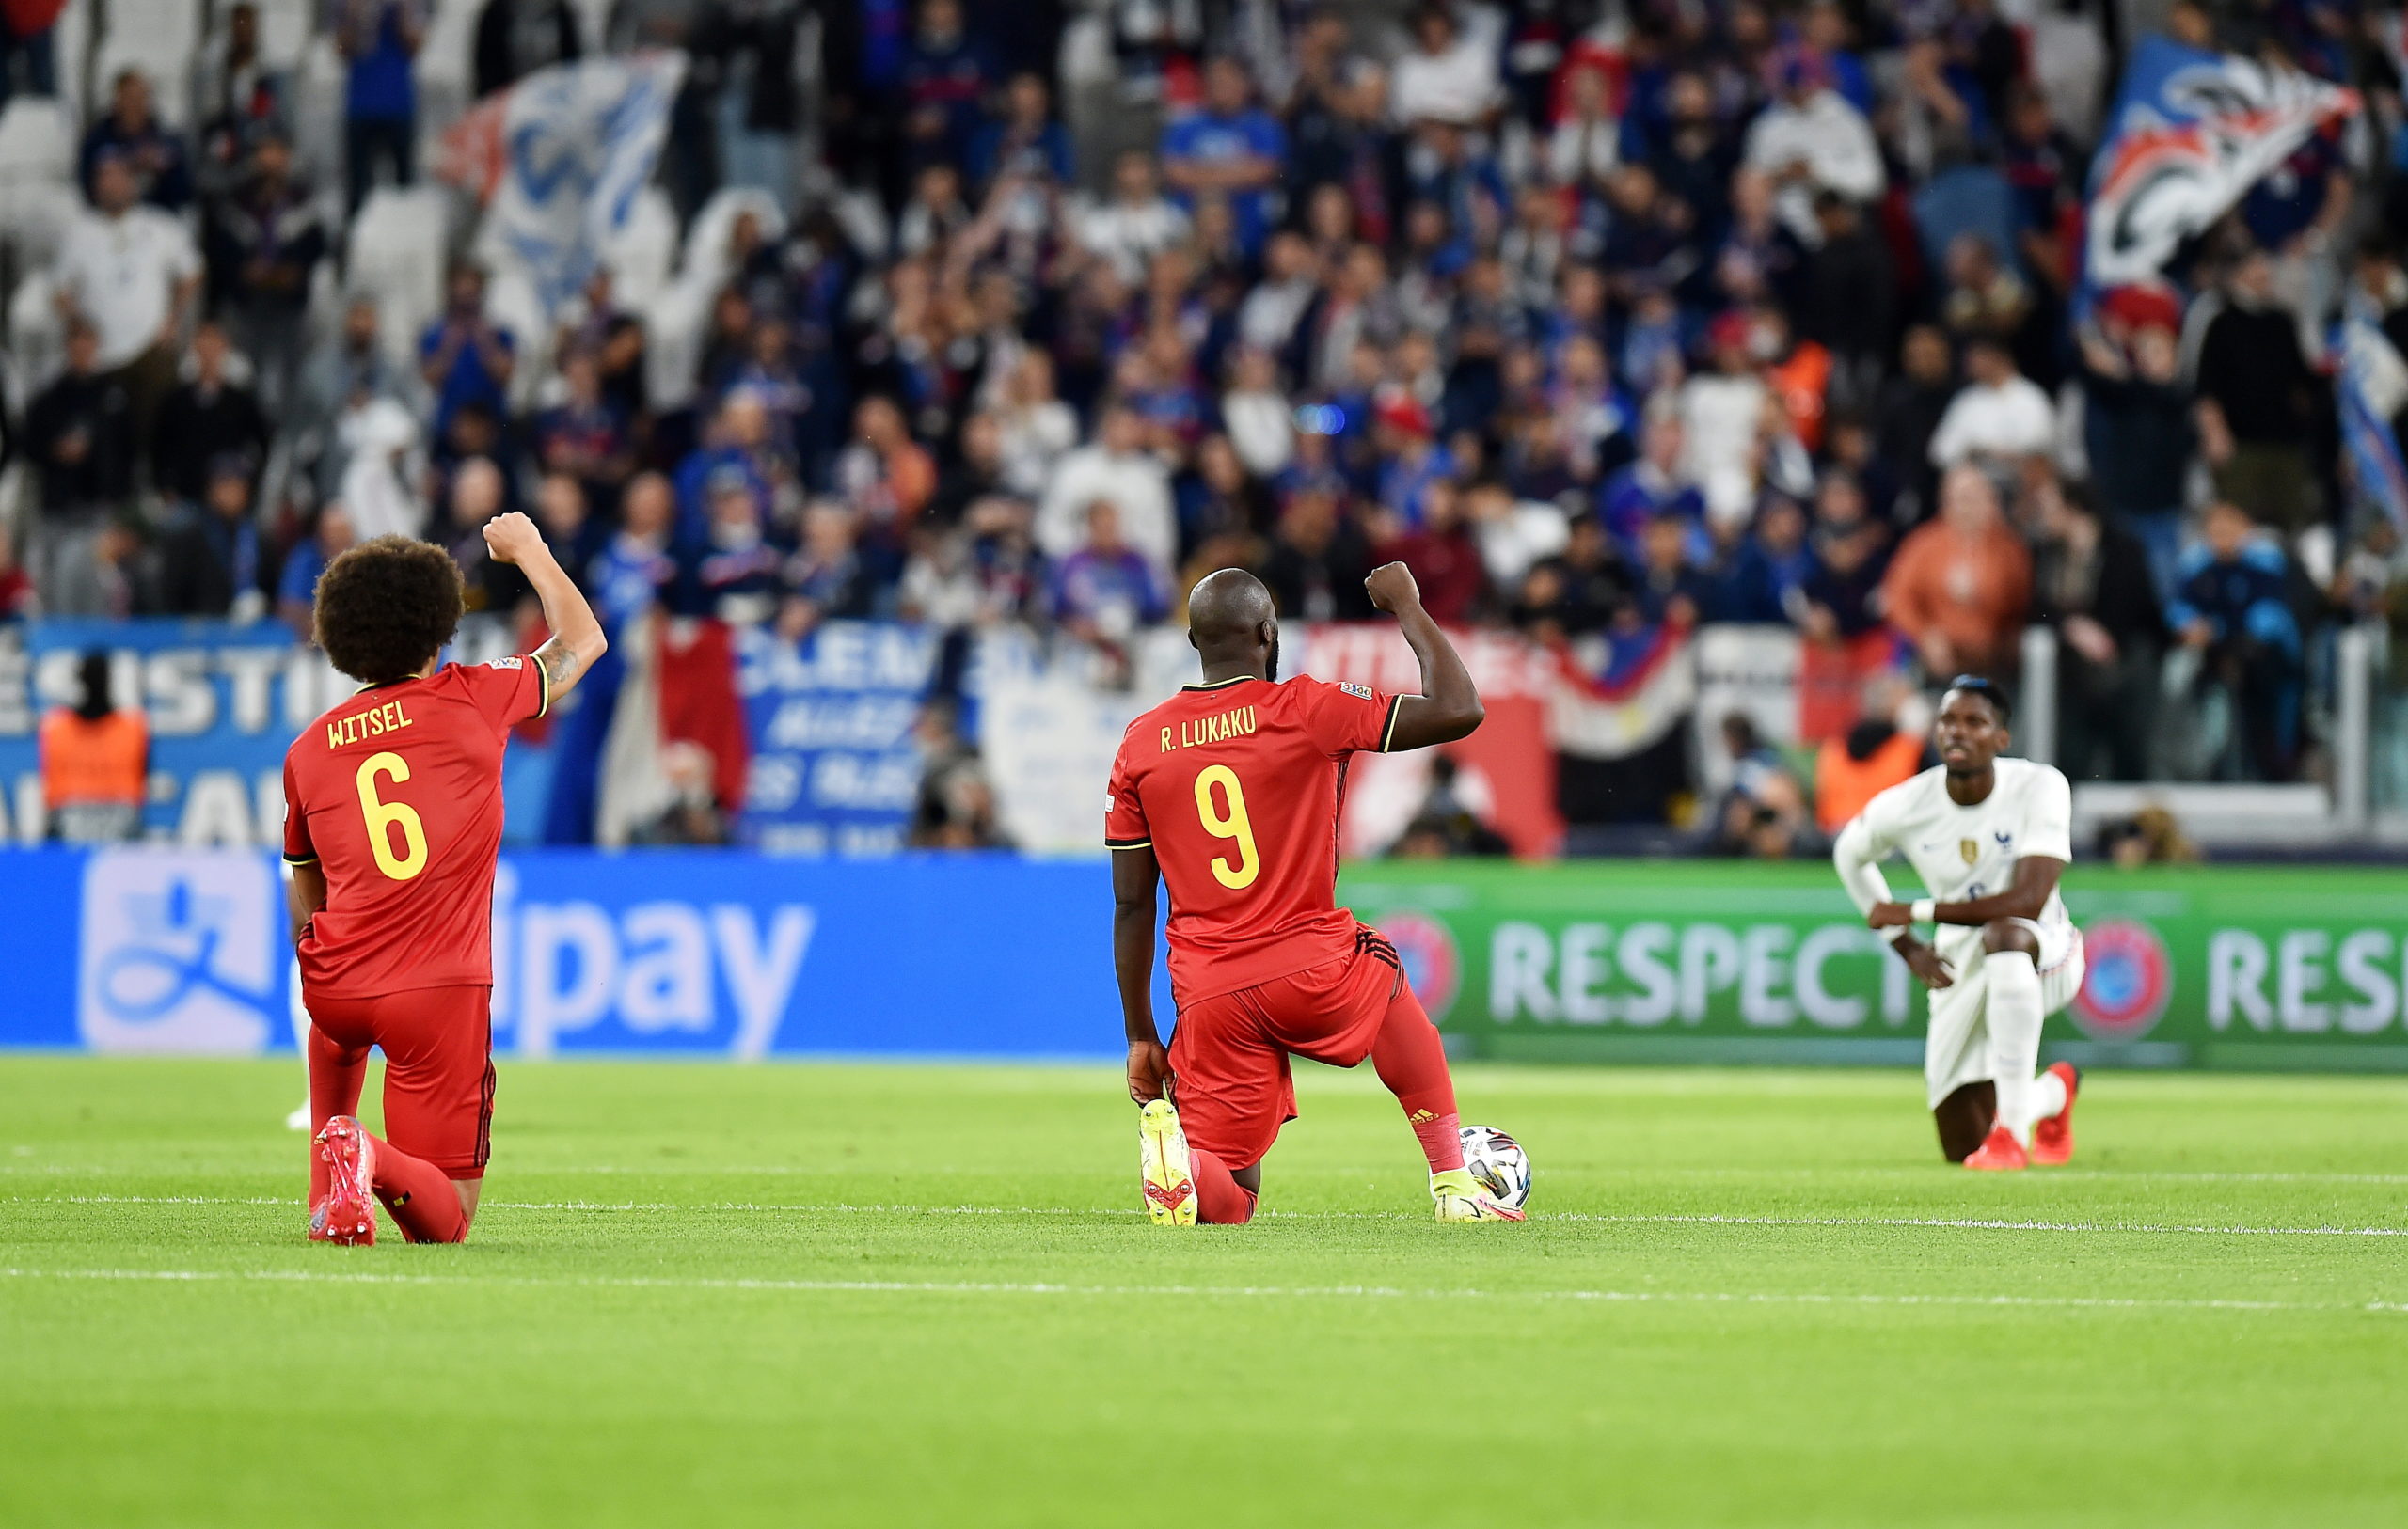 epa09511974 Alex Witsel (L) and Romelu Lukaku of Belgium and Paul Pogba (R) of France take the knee before the UEFA Nations League semi final soccer match between Belgium and France in Turin, Italy, 07 October 2021. EPA-EFE/Alessandro di Marco